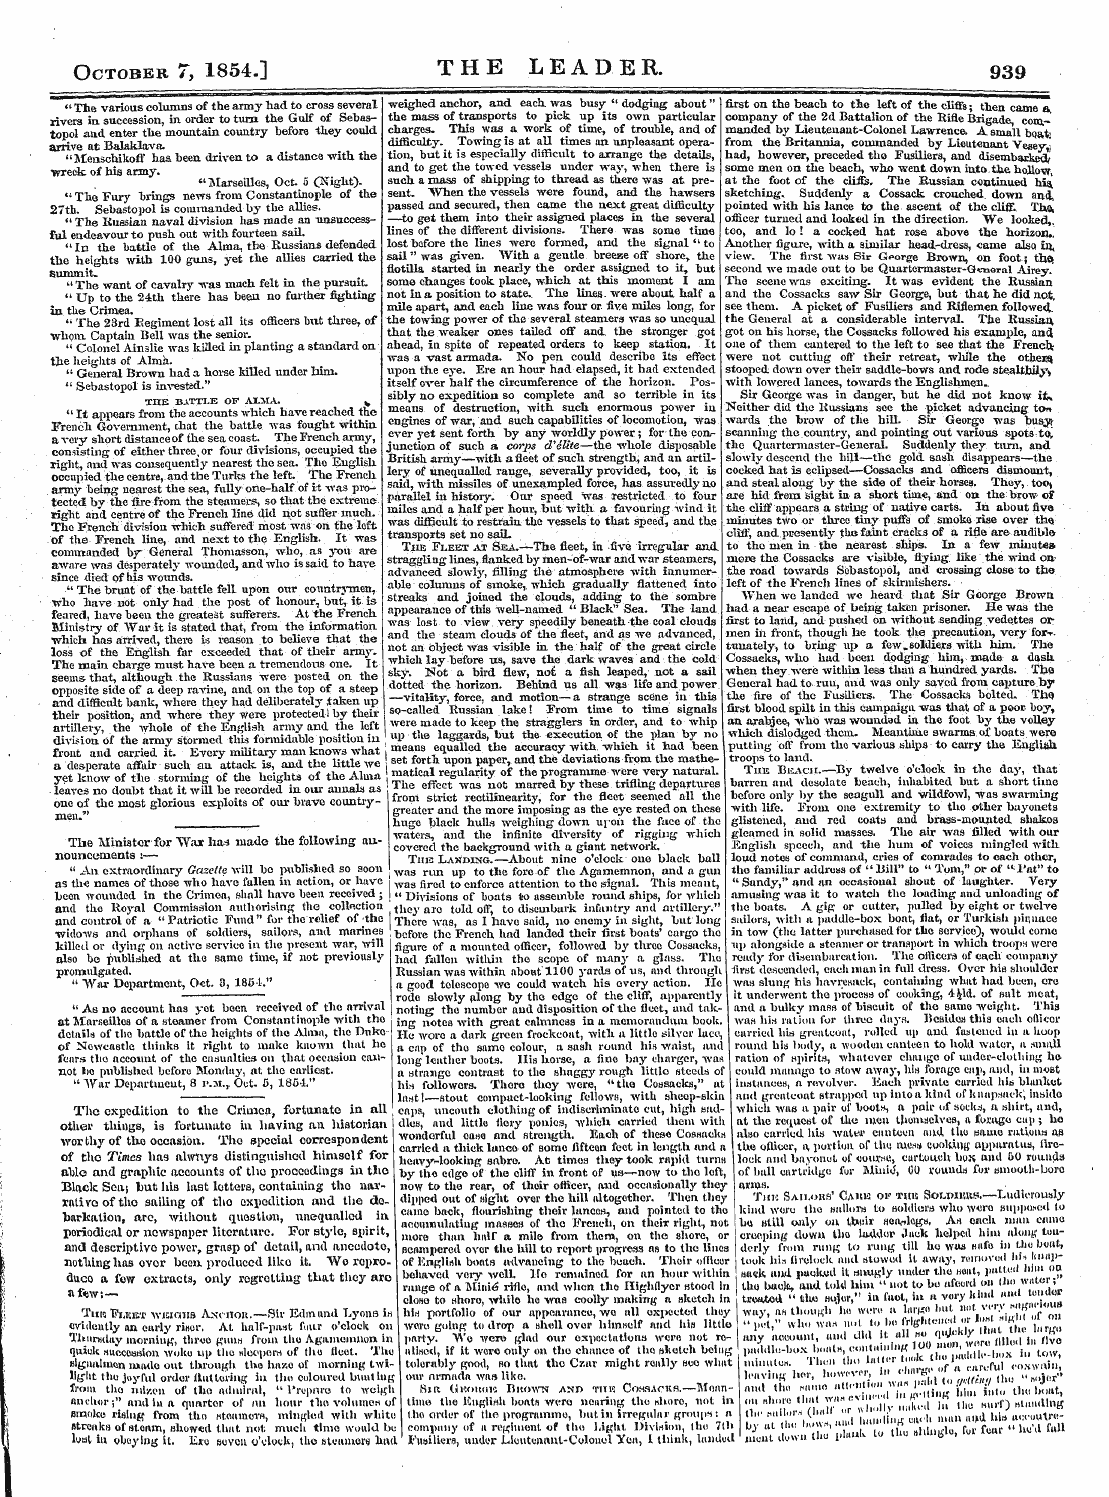 Leader (1850-1860): jS F Y, Country edition - October 7, 1854.] The Leader. 939